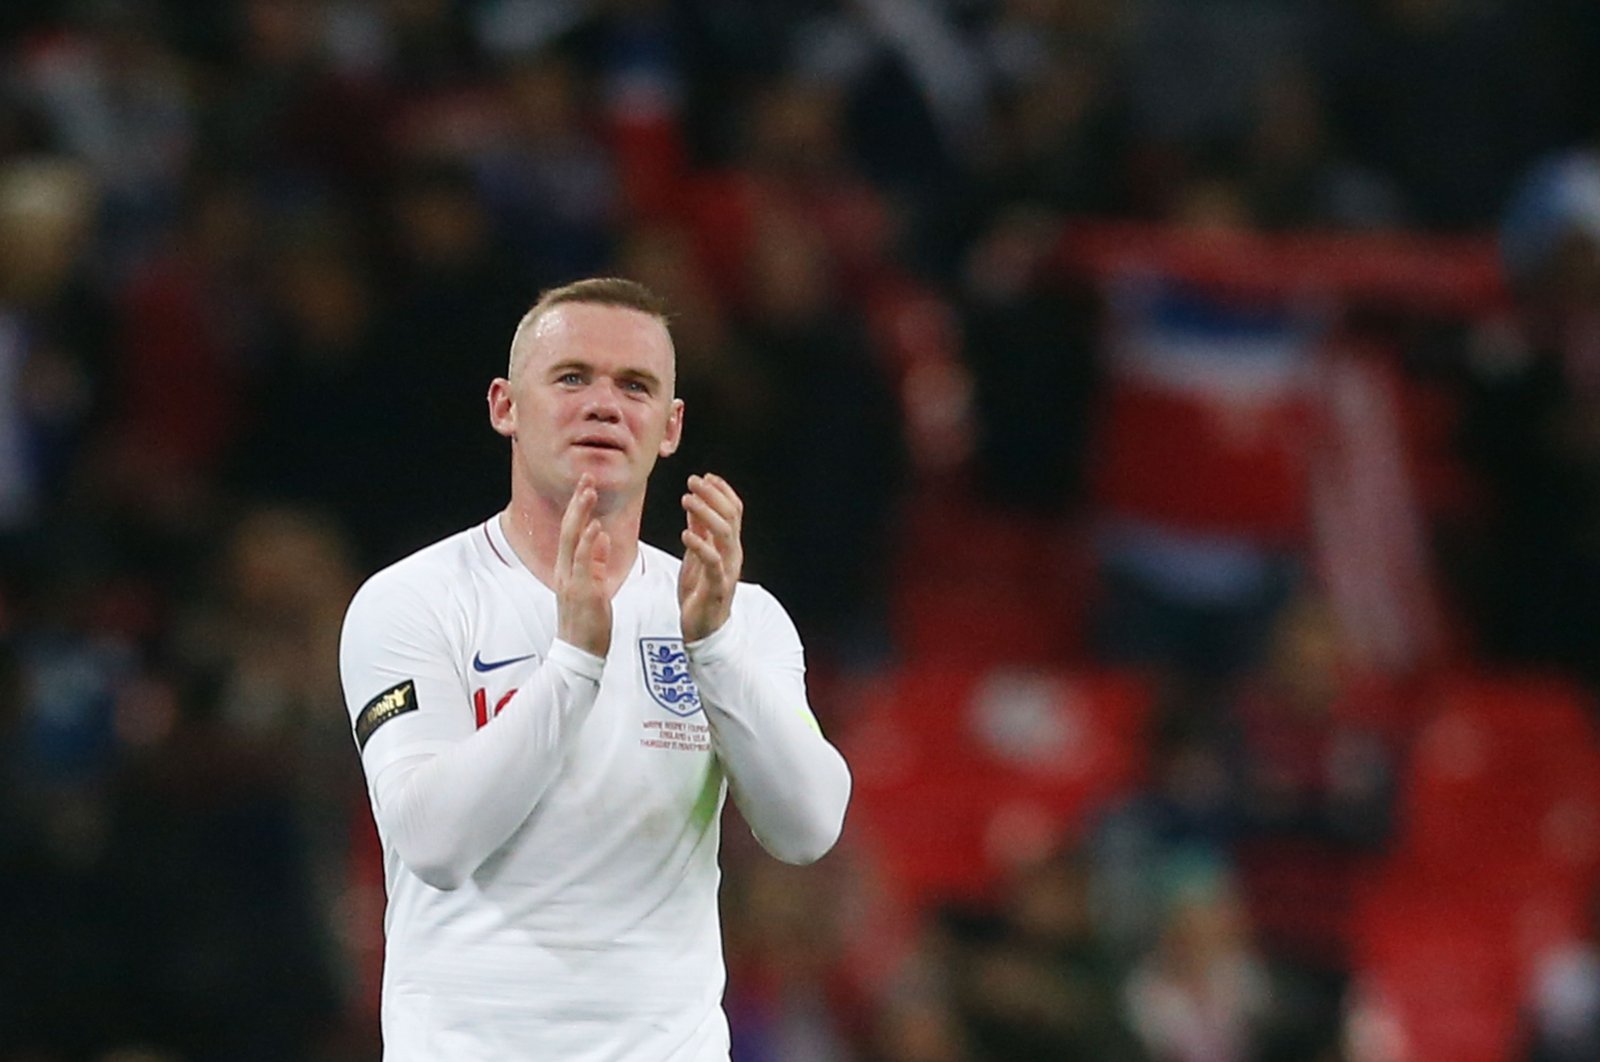 England great Wayne Rooney ends playing career to become full-time